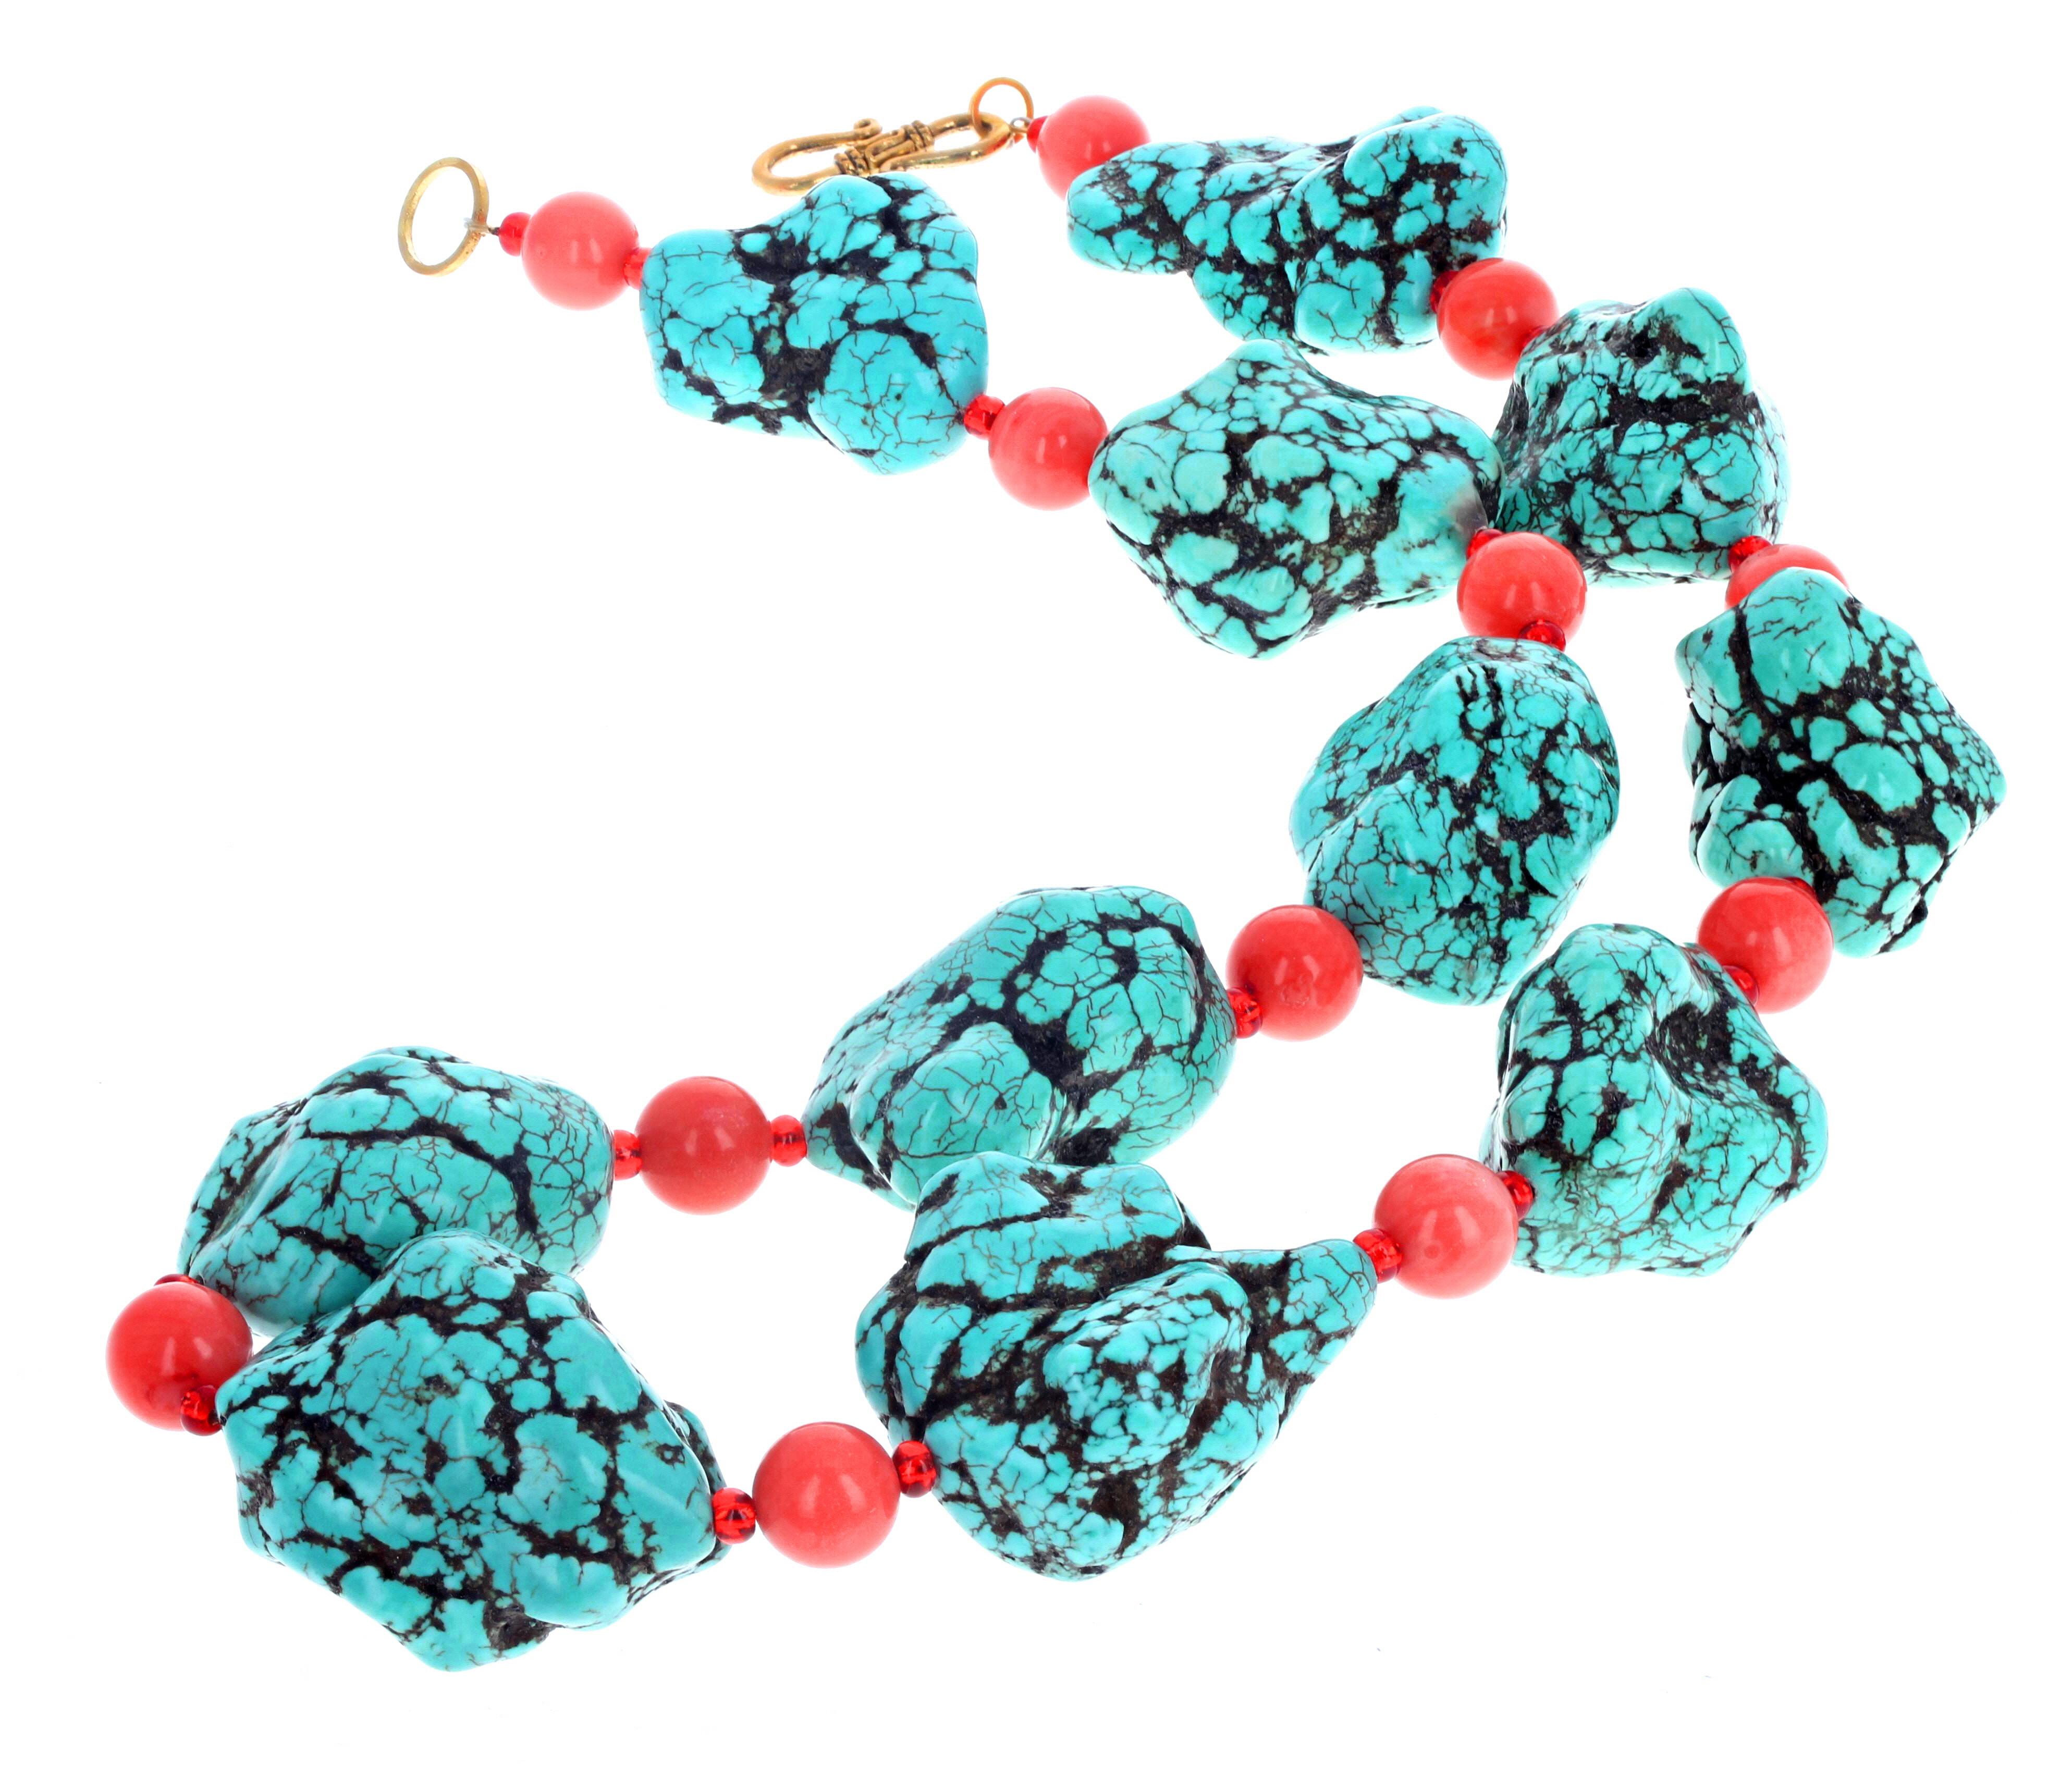 These enormous polished chunks of Turquoise are enhanced with highly polished orange Carnelians to complete this fascinating 21 1/2 inch long necklace.  The largest Turquoise is 36mm x 28mm and the clasp is a gold plated hook clasp.  